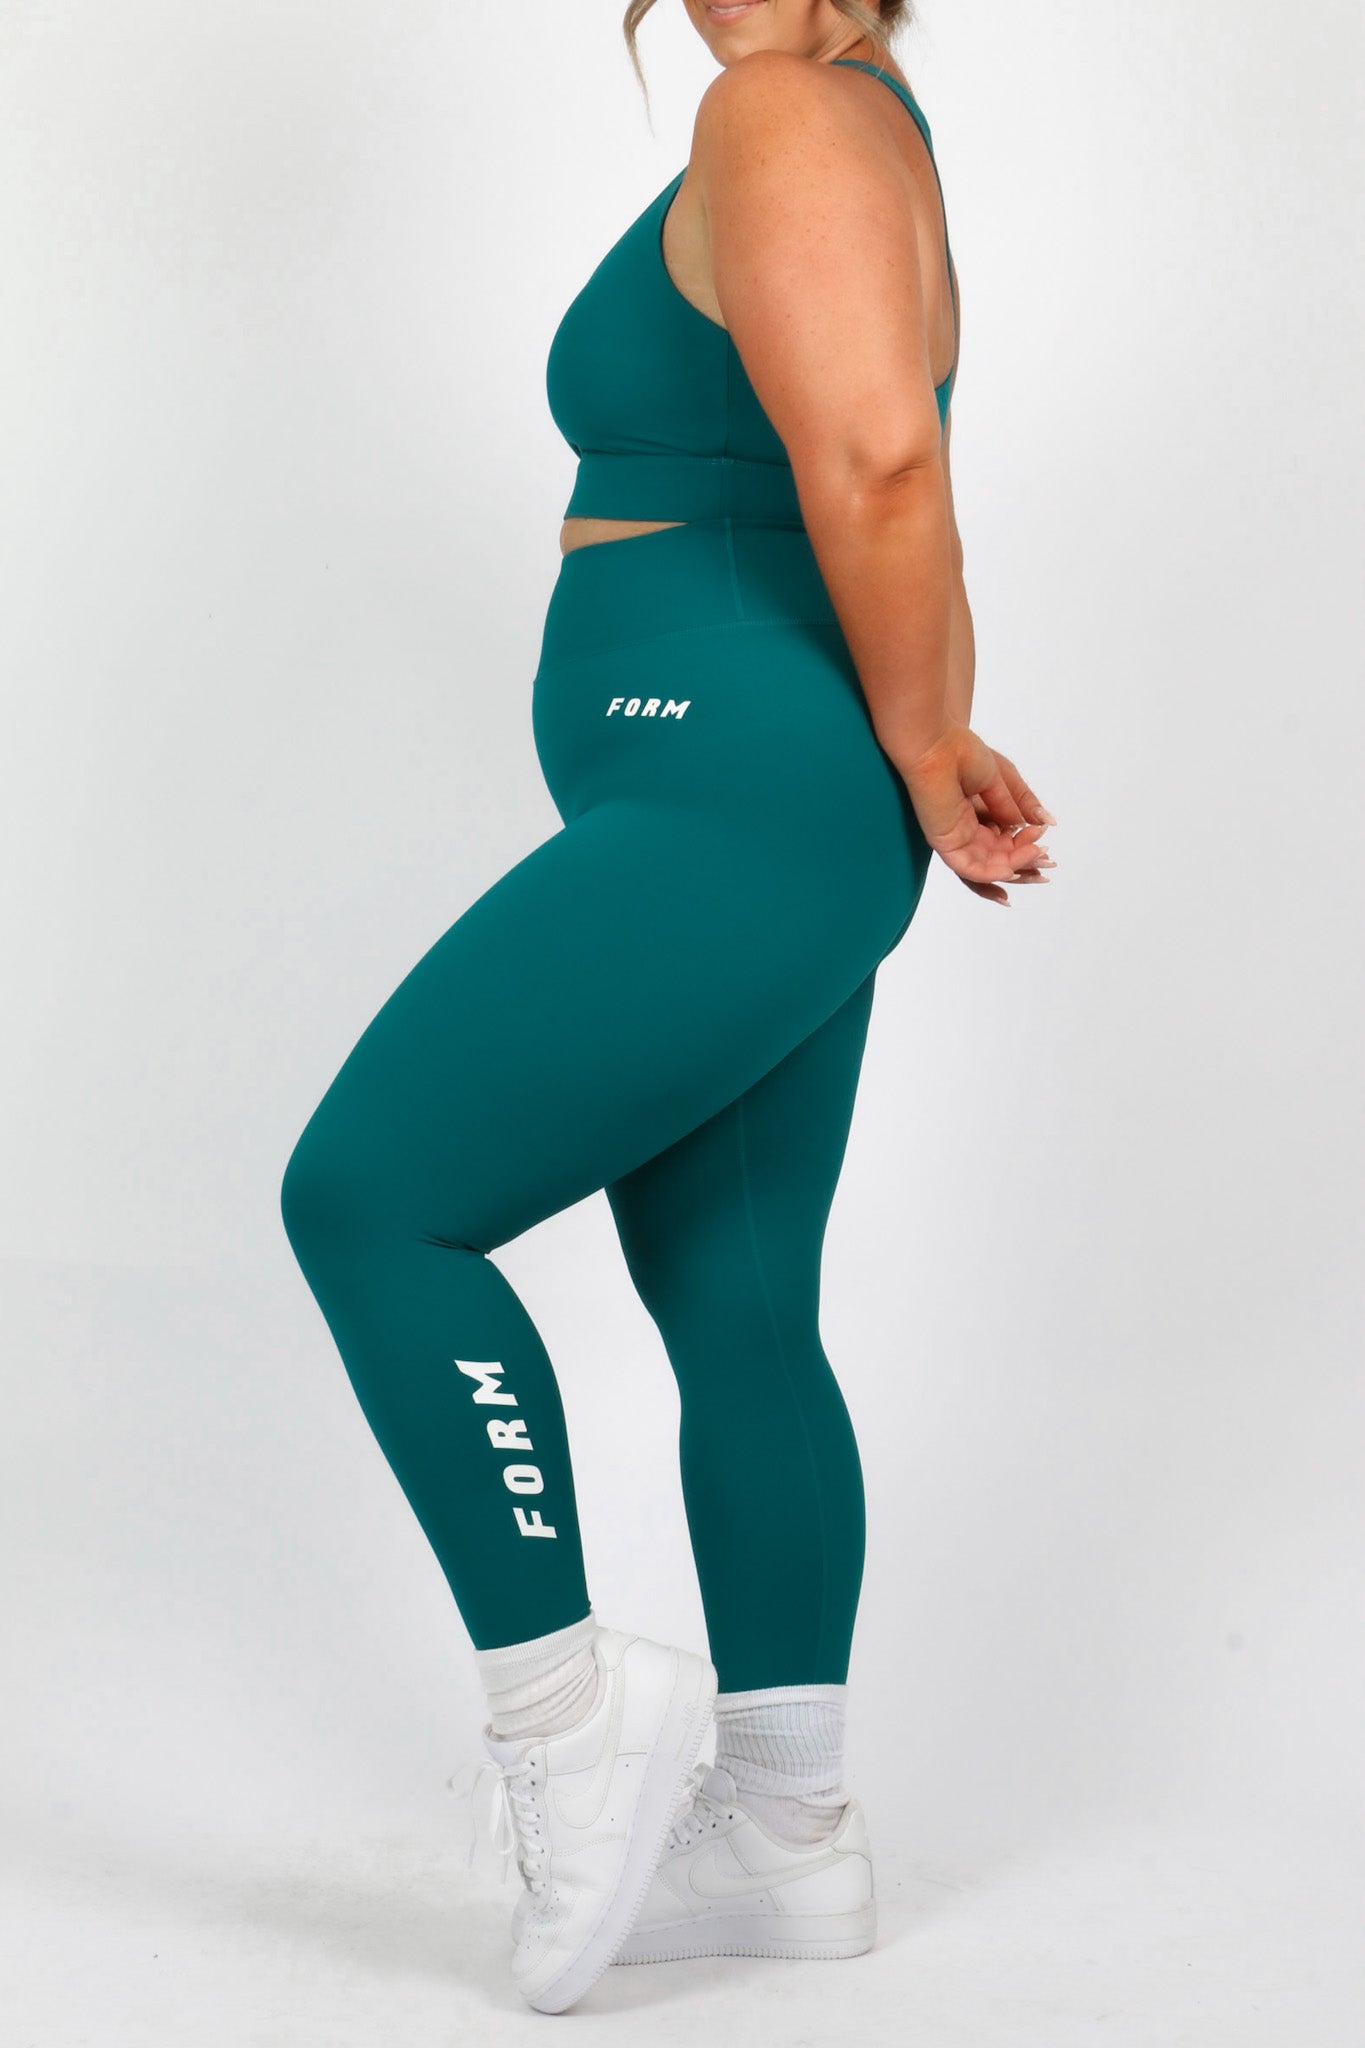 FORM BASE TIGHT 7/8 TEAL